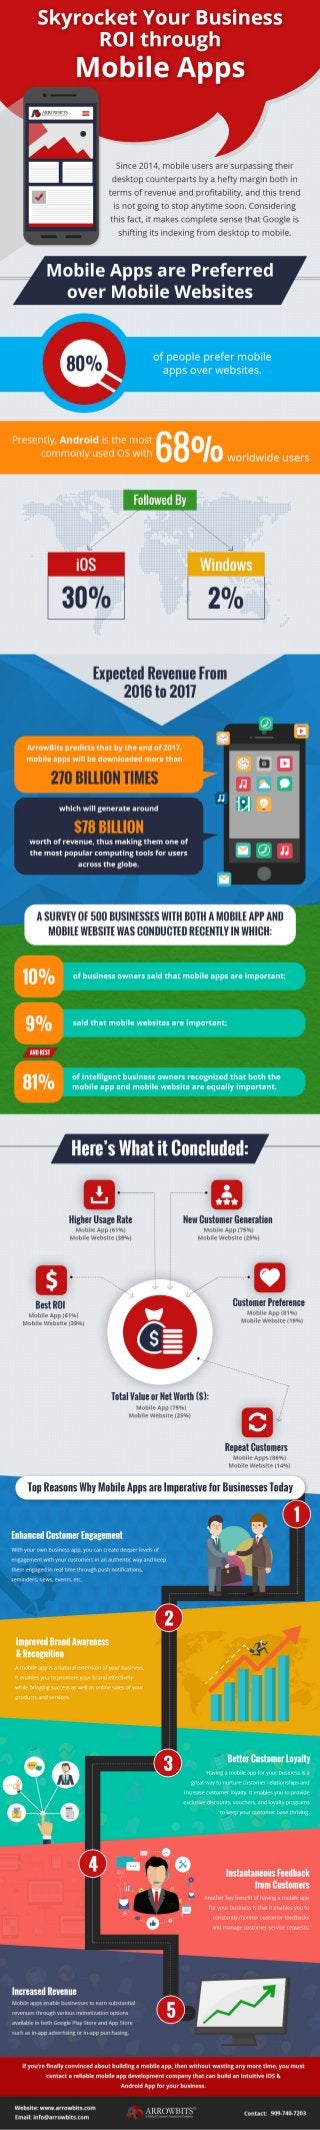 Know How Mobile Apps Can Fuel Your Business Revenue - Infographic